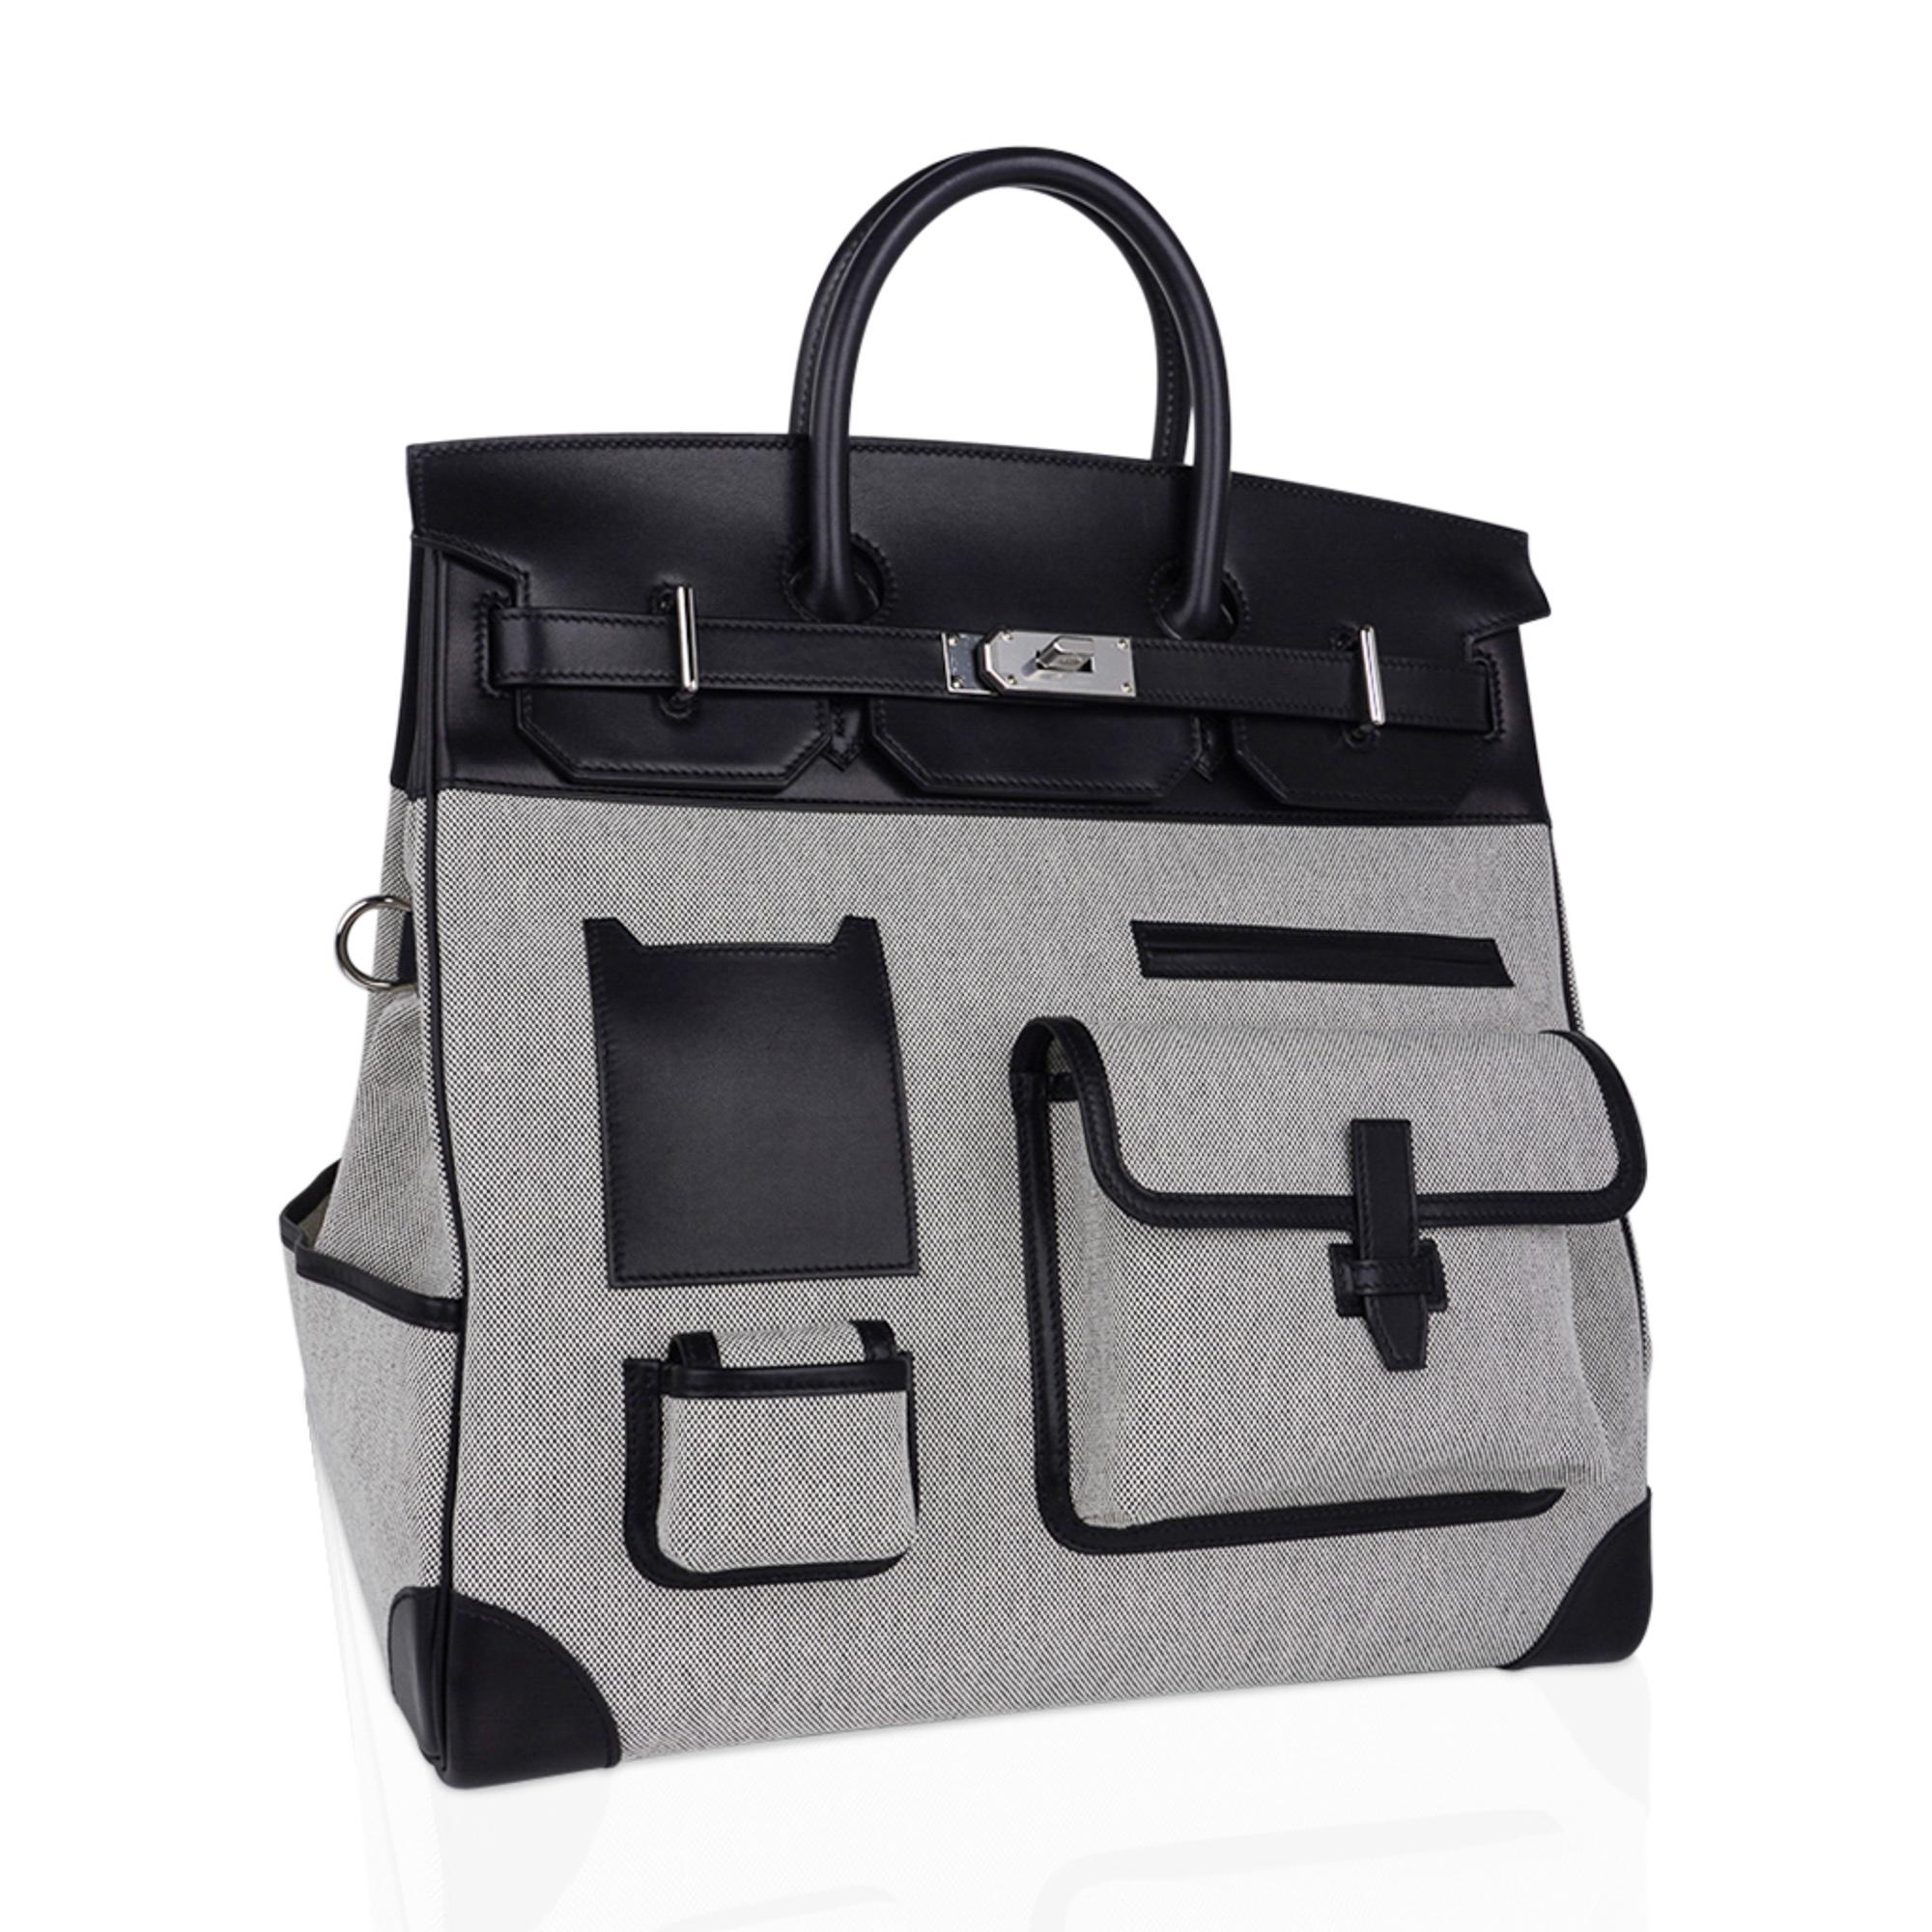 Mightychic offers a very rare Hermes Cargo Birkin HAC 40 bag featured in Black Evercalf leather and Toile H in Ecru and Noir.
Added exterior pockets, cup holder, D ring and clips bring a fresh take to this iconic bag.
This fresh, functional Hermes